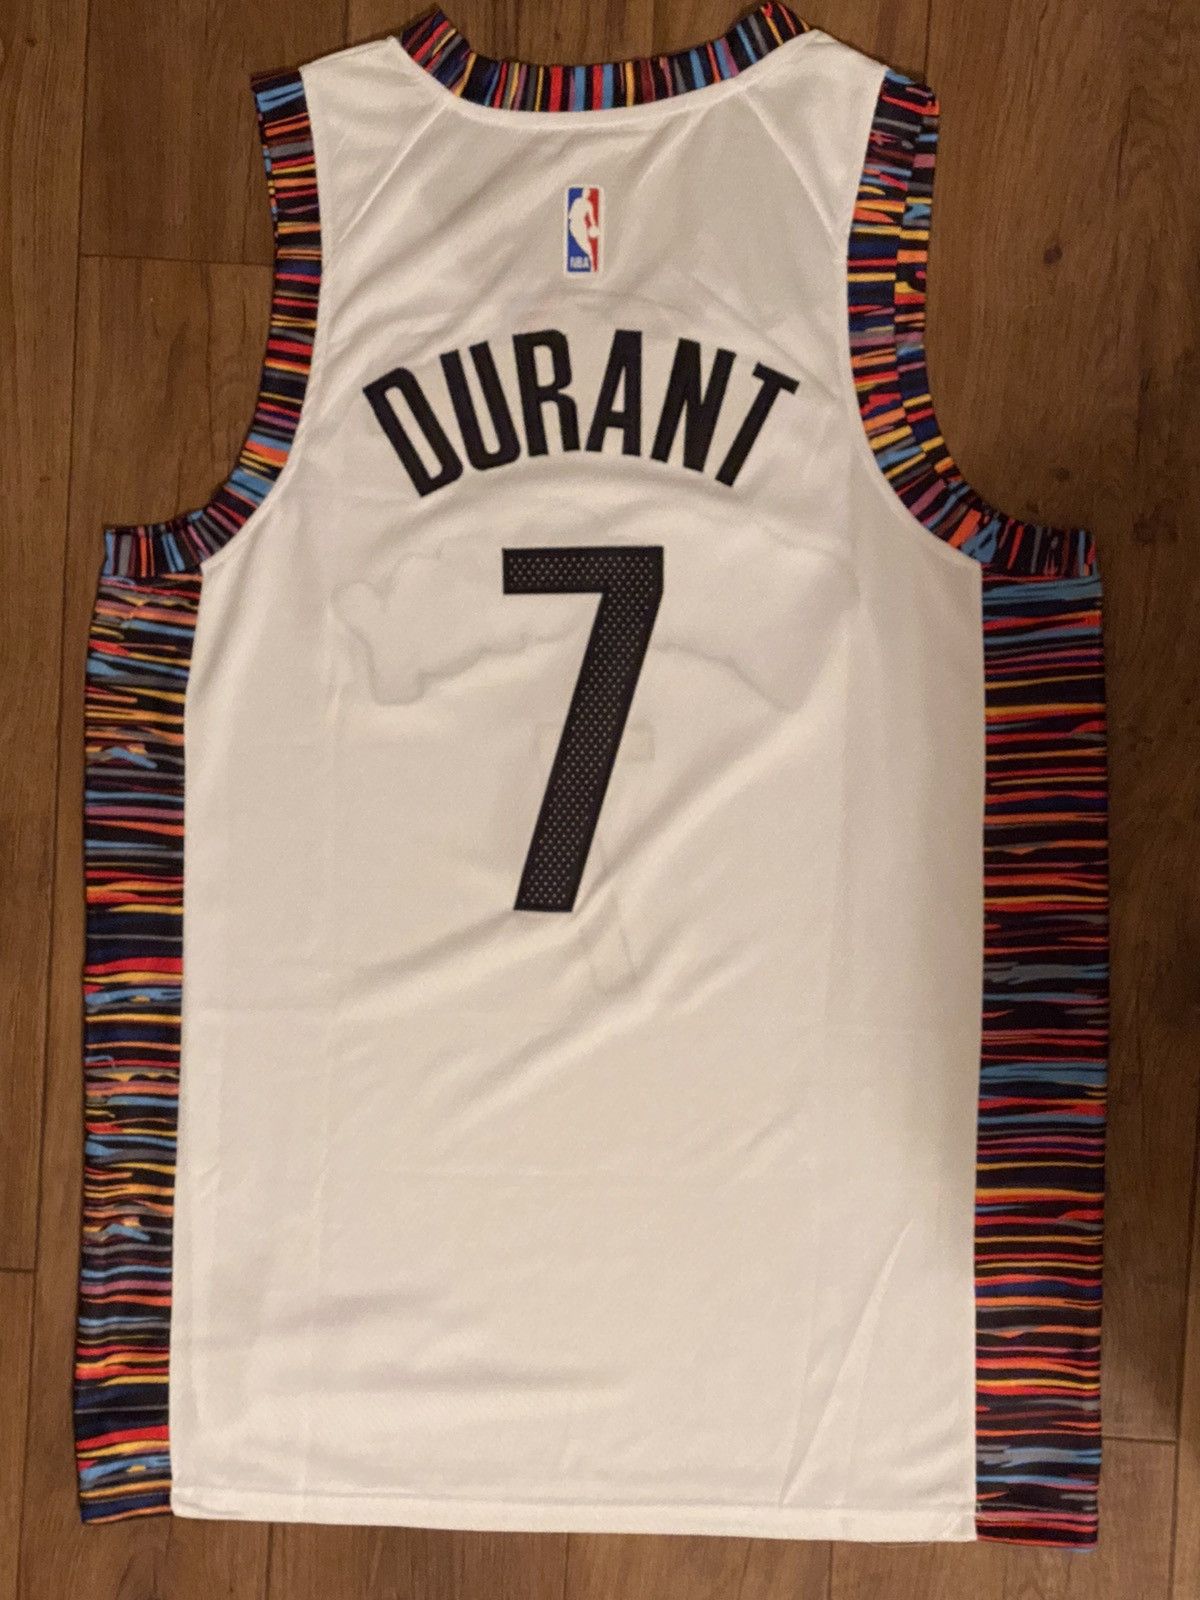 Nike Kevin Durant Bed-Stuy Brooklyn Nets Jersey Size US M / EU 48-50 / 2 - 2 Preview